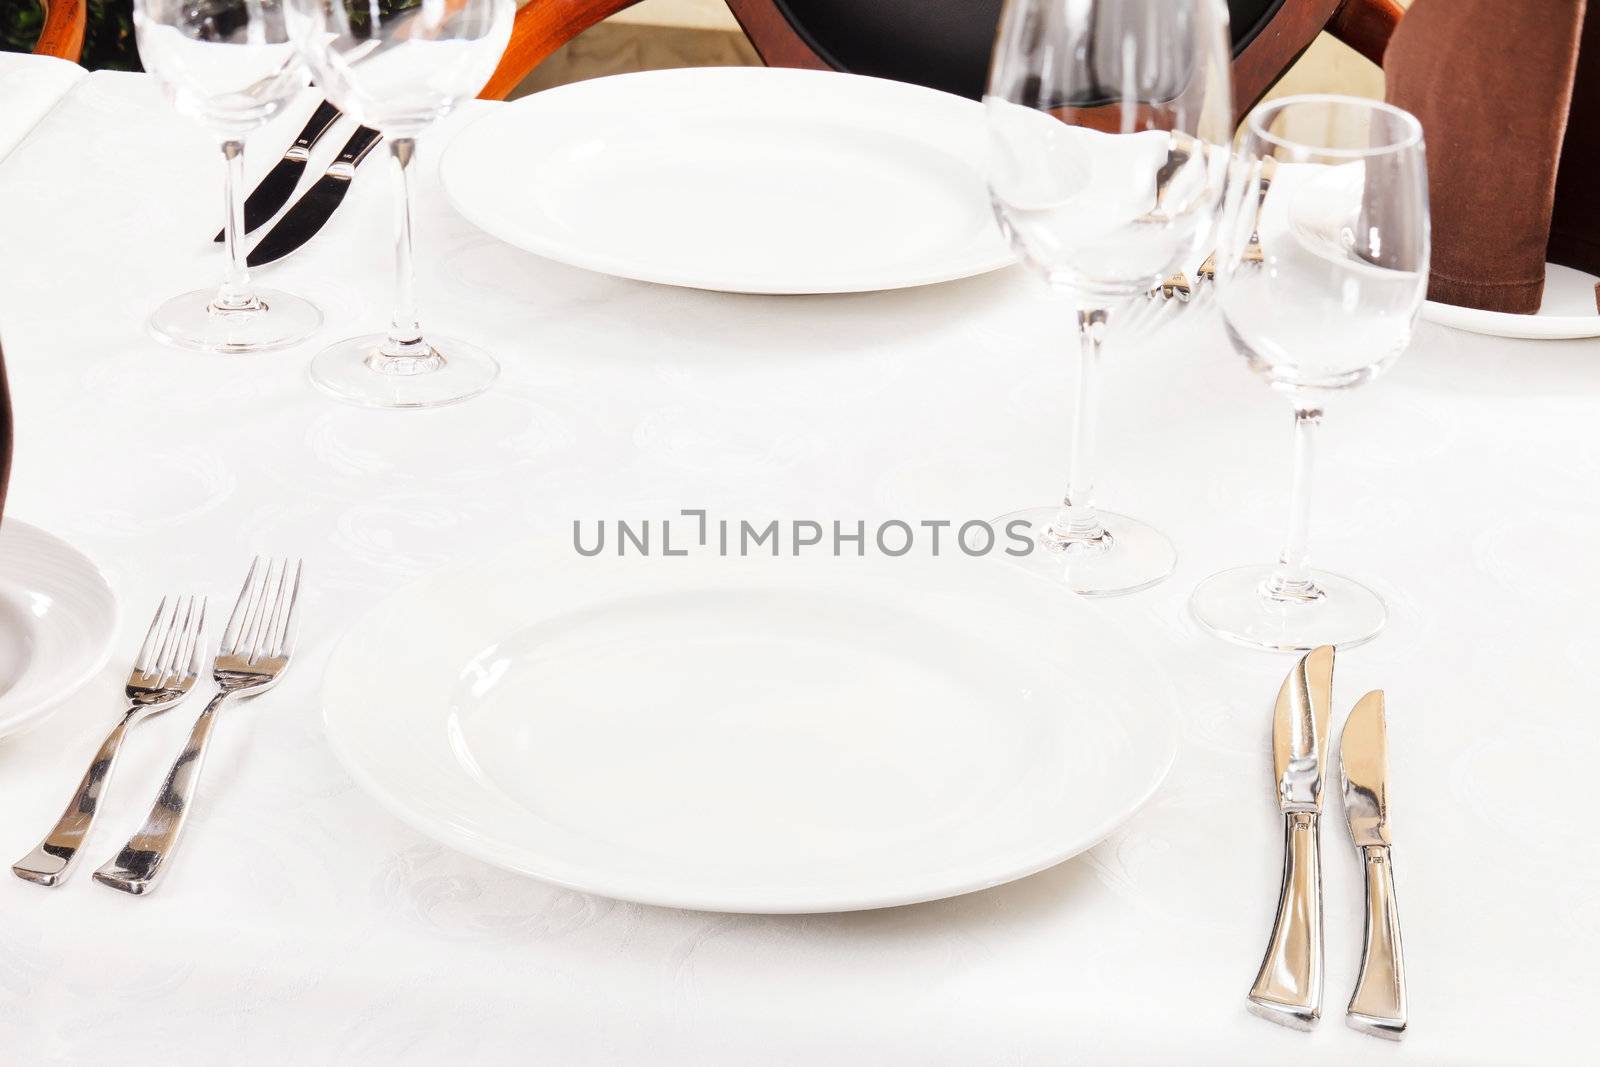 Tables set for meal  by shebeko